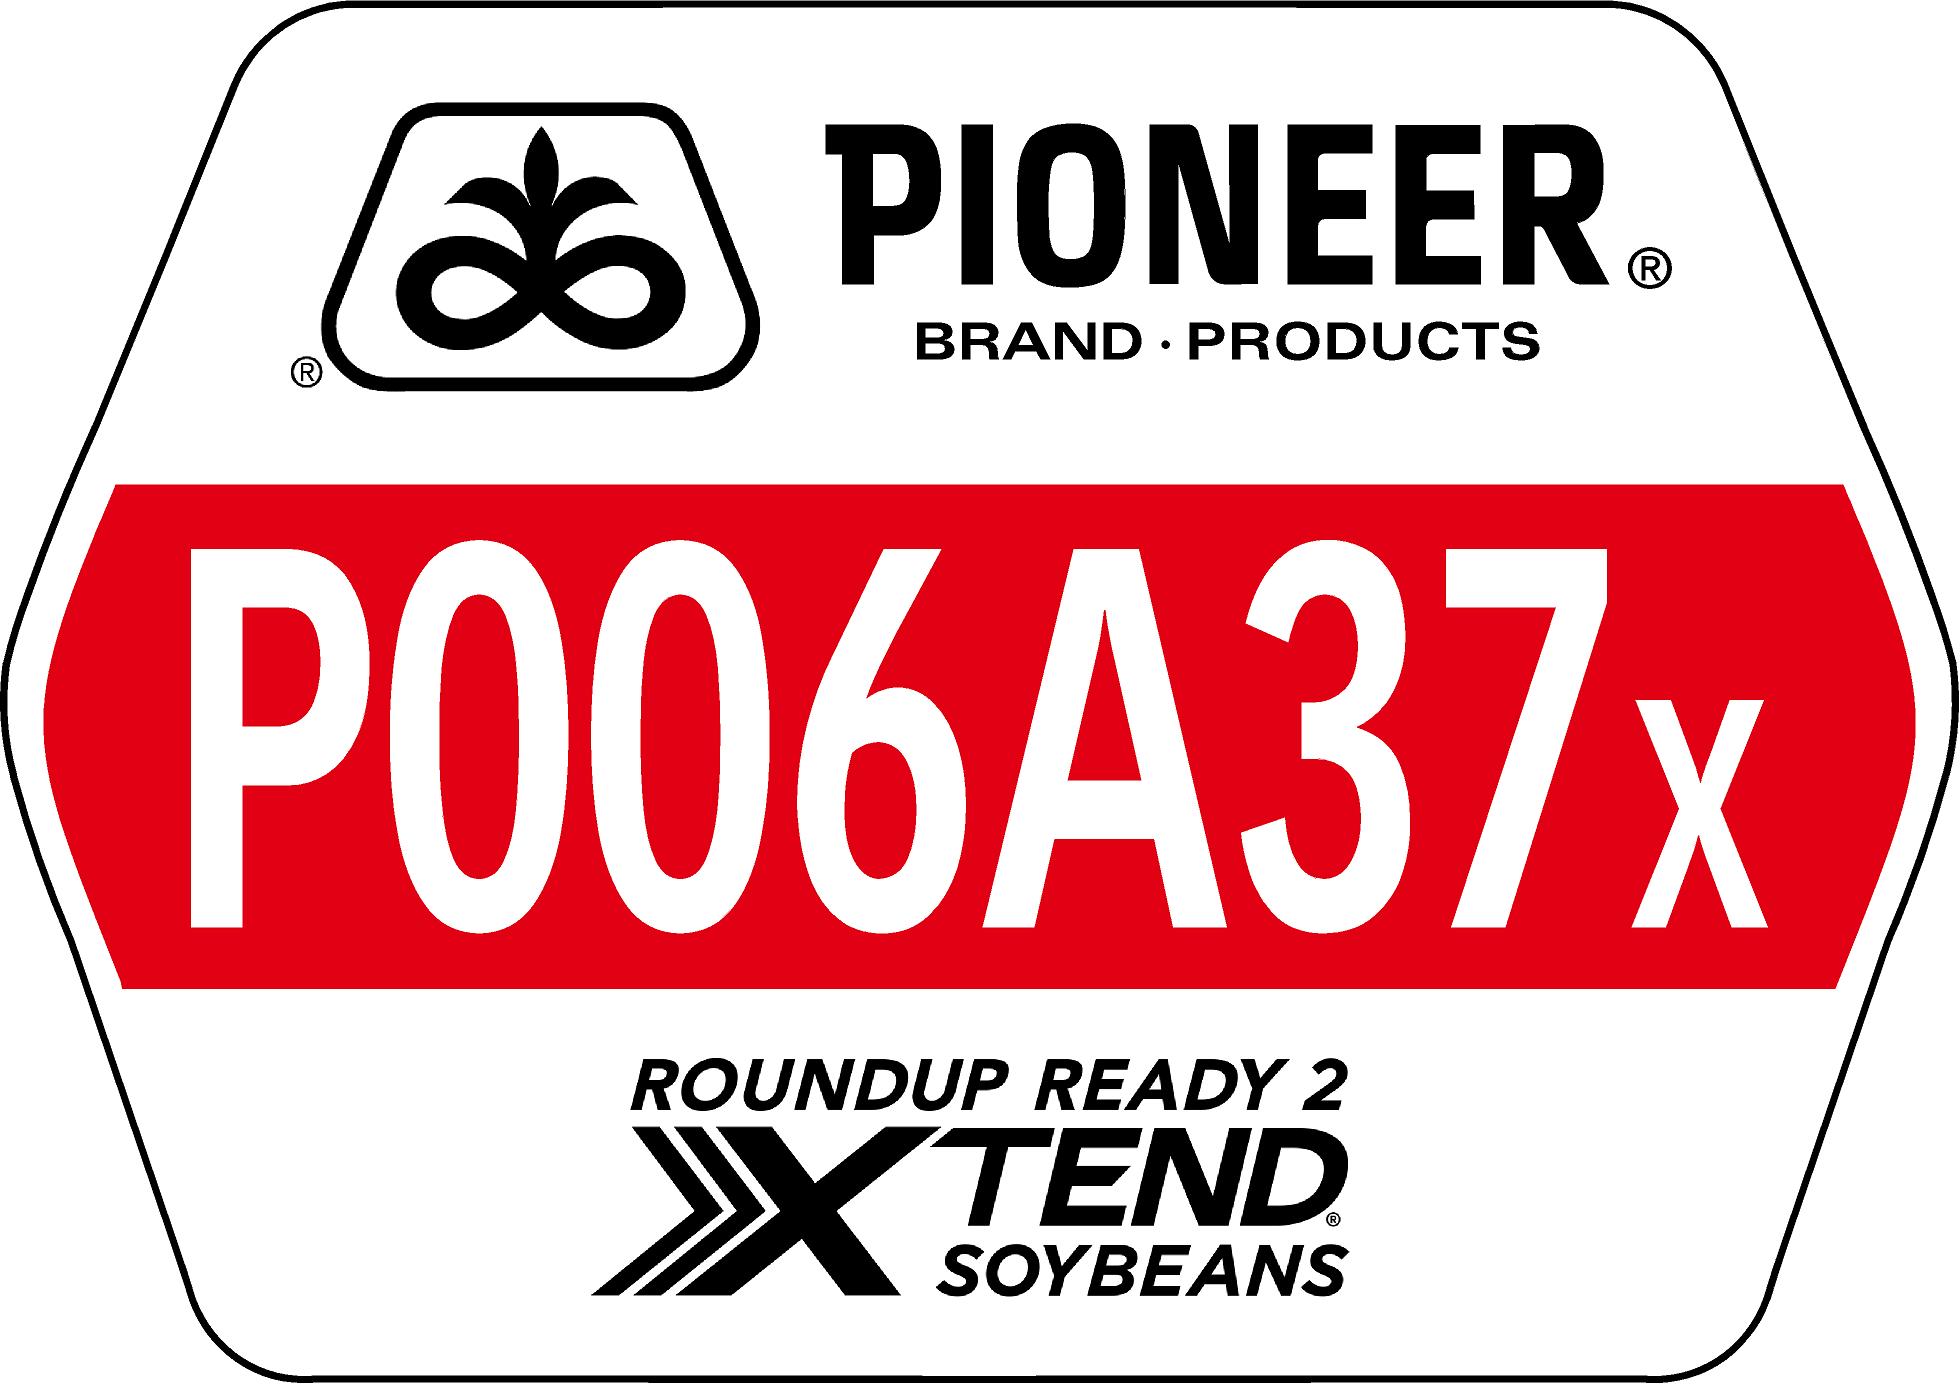 Field Sign > Soybeans > P006A37X